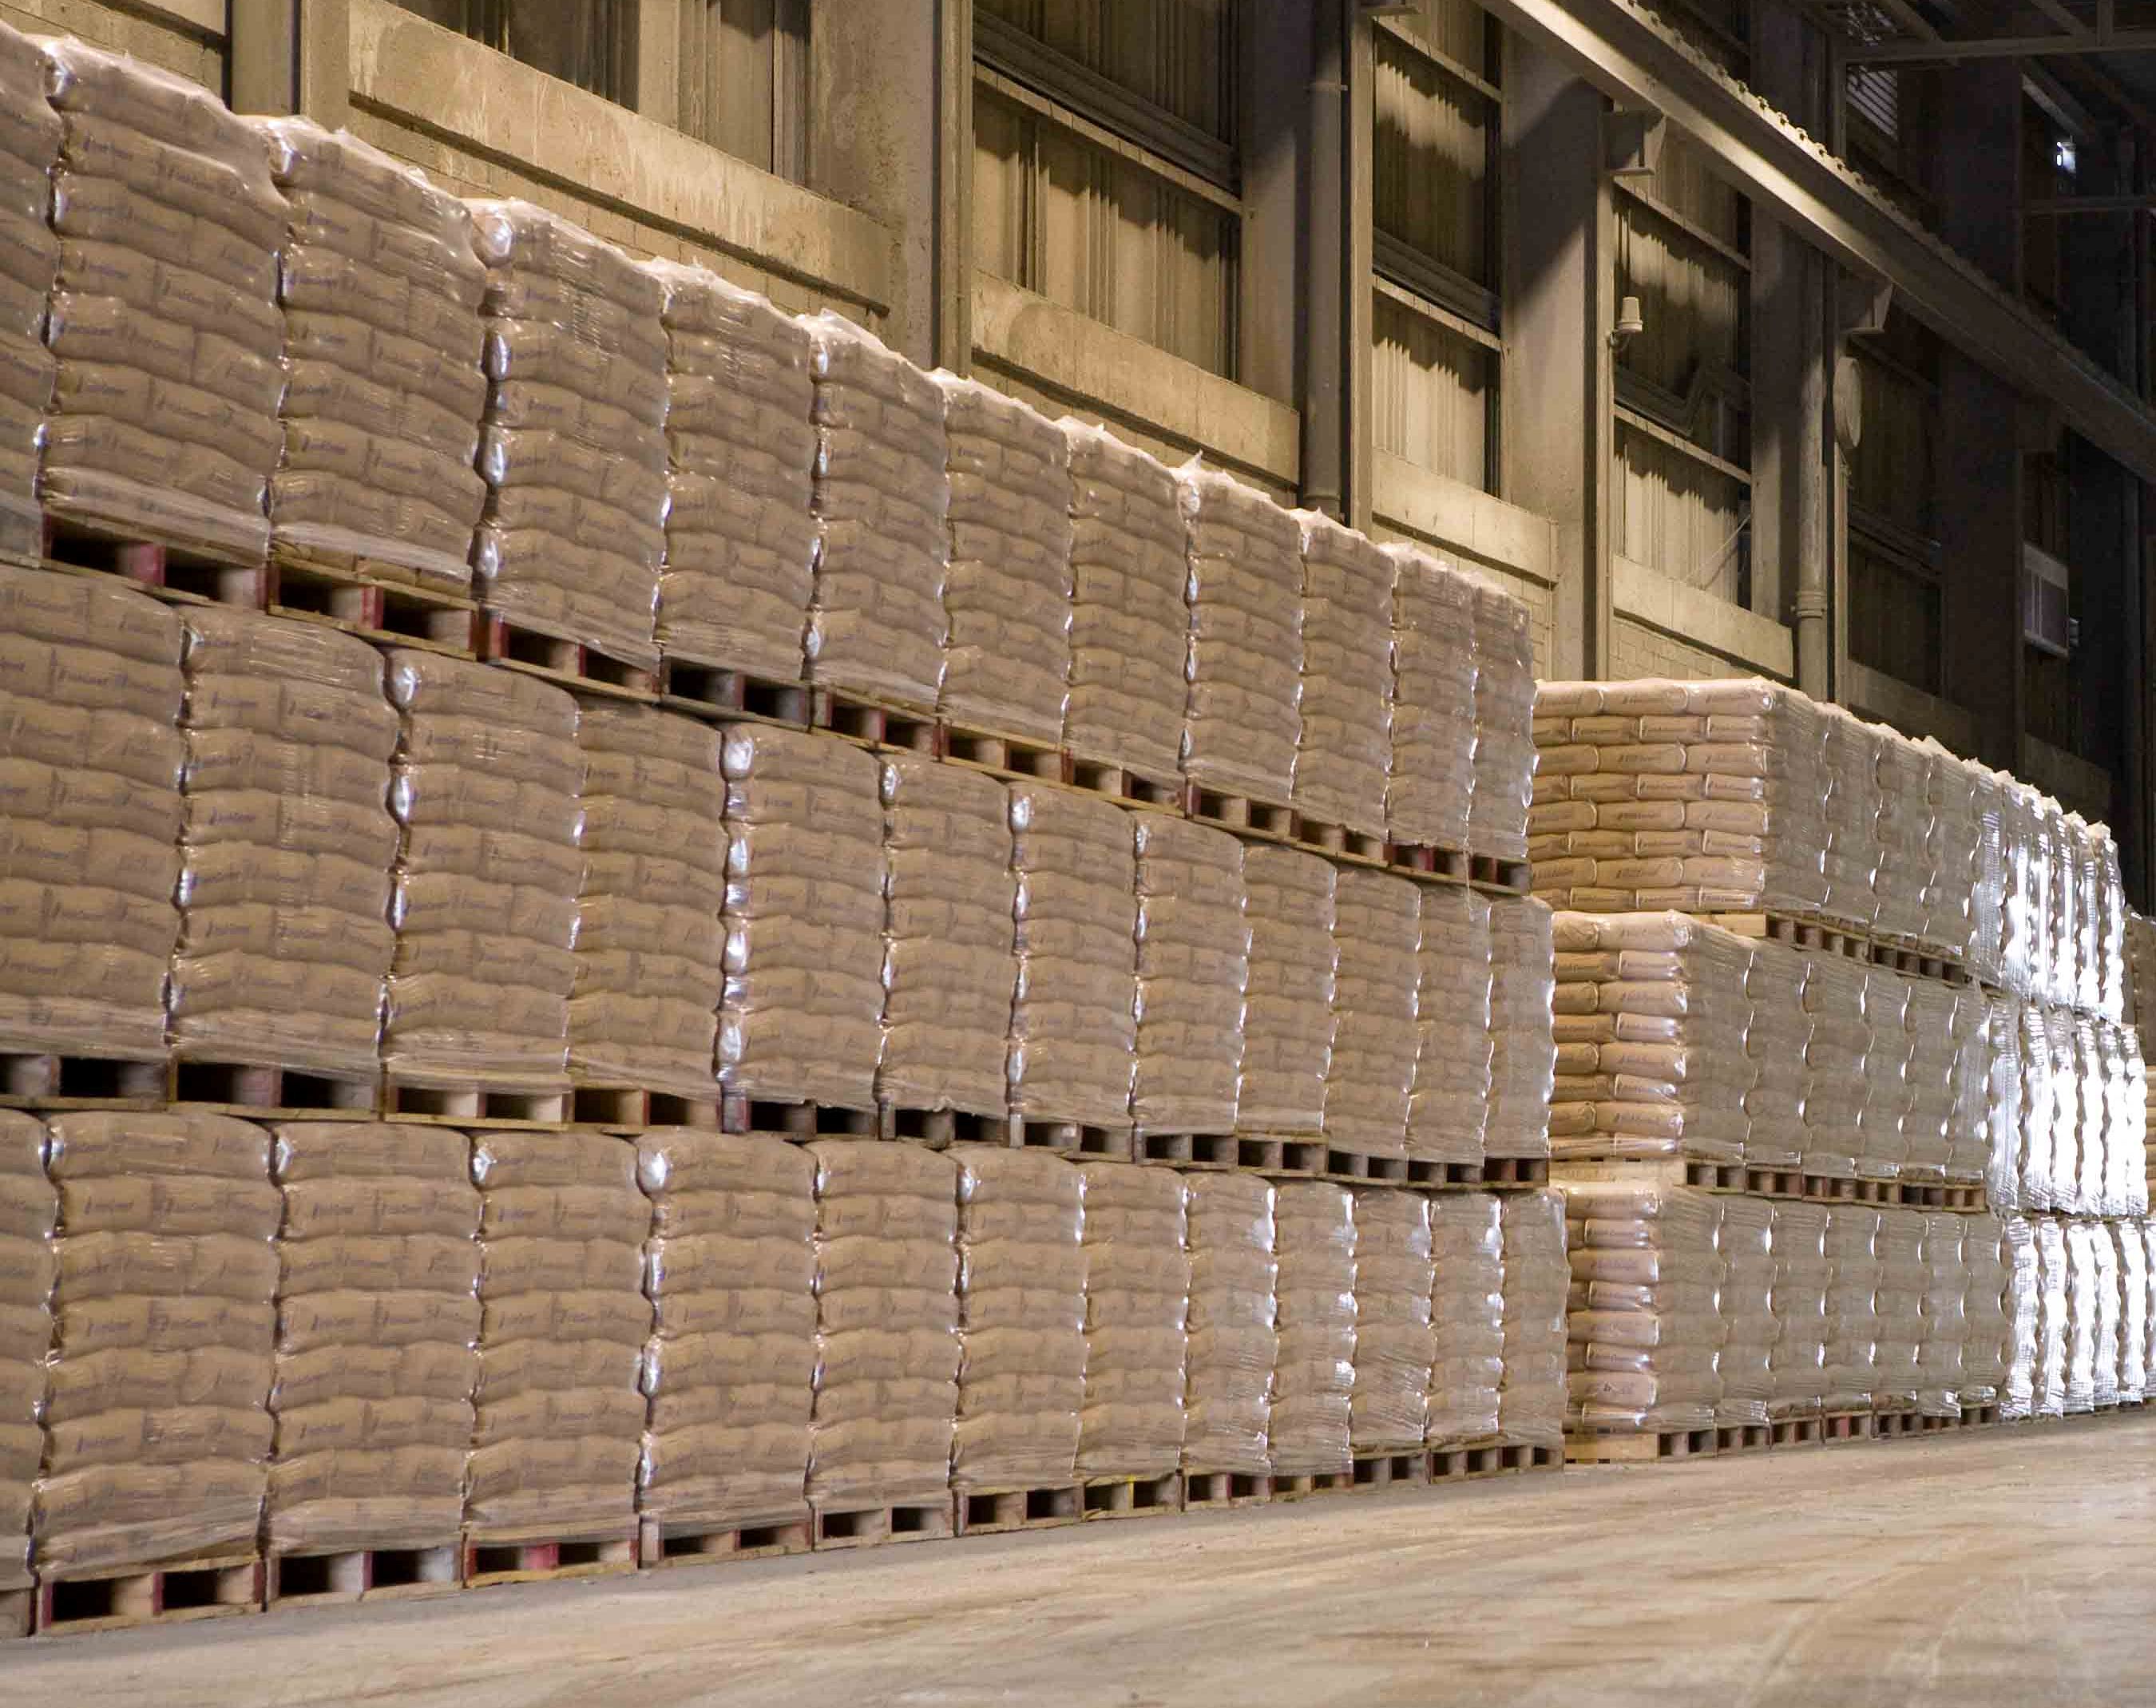 In the first 5 months of this year, the Iran`s cement grew by more than 24 million tons